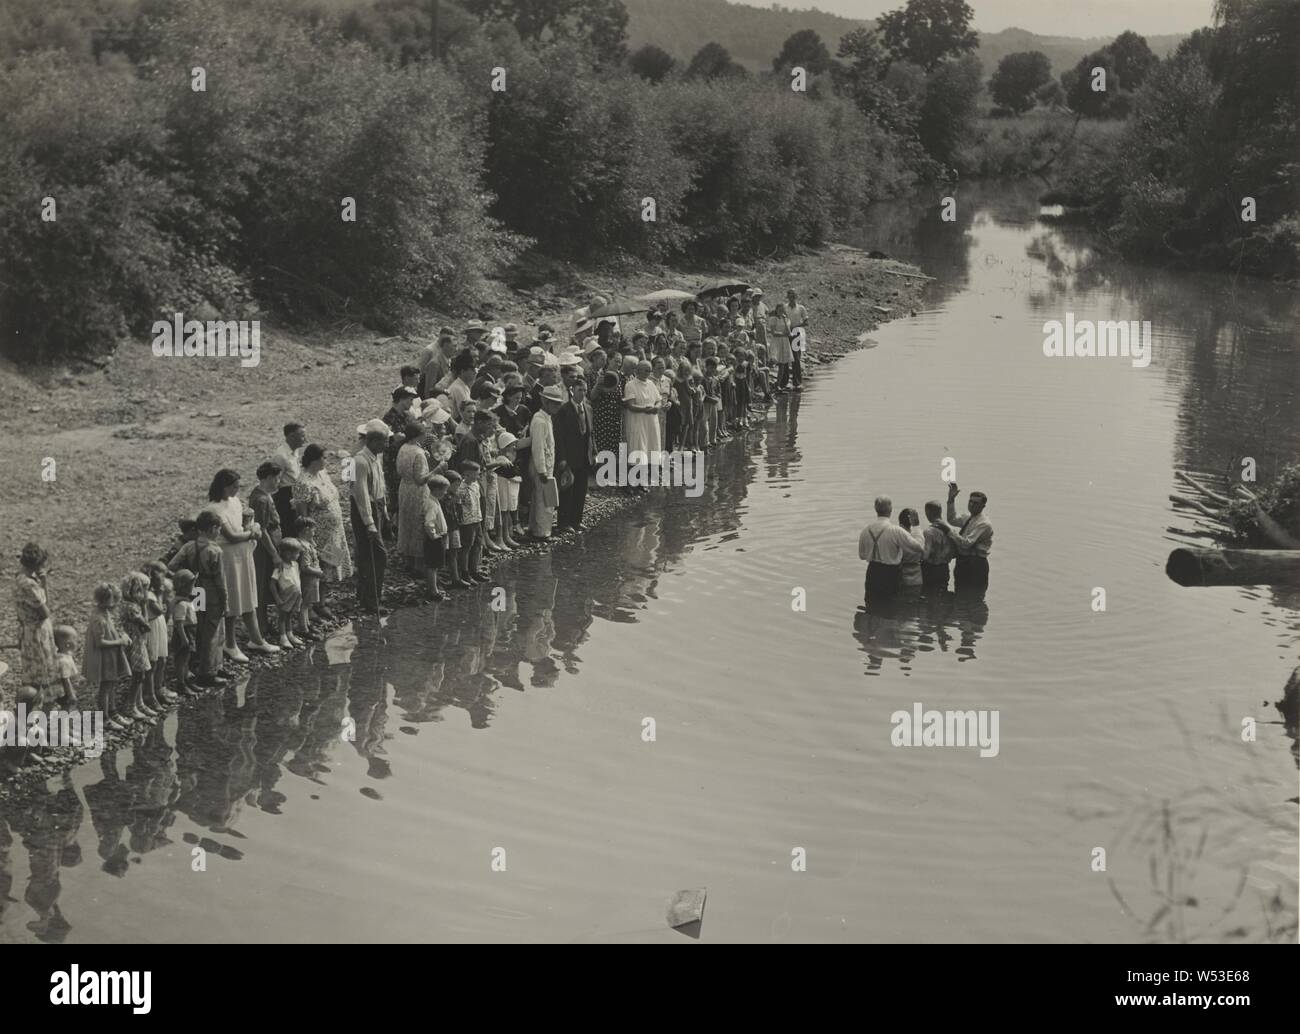 Members of the Primitive Baptist Church in Moorehead sic, Kentucky, Attending a Creek Baptism by Submersion, August 1940, Marion Post Wolcott (American, 1910 - 1990), Morehead, Kentucky, United States, August 1940, Gelatin silver print, 17.8 × 24.4 cm (7 × 9 5/8 in Stock Photo